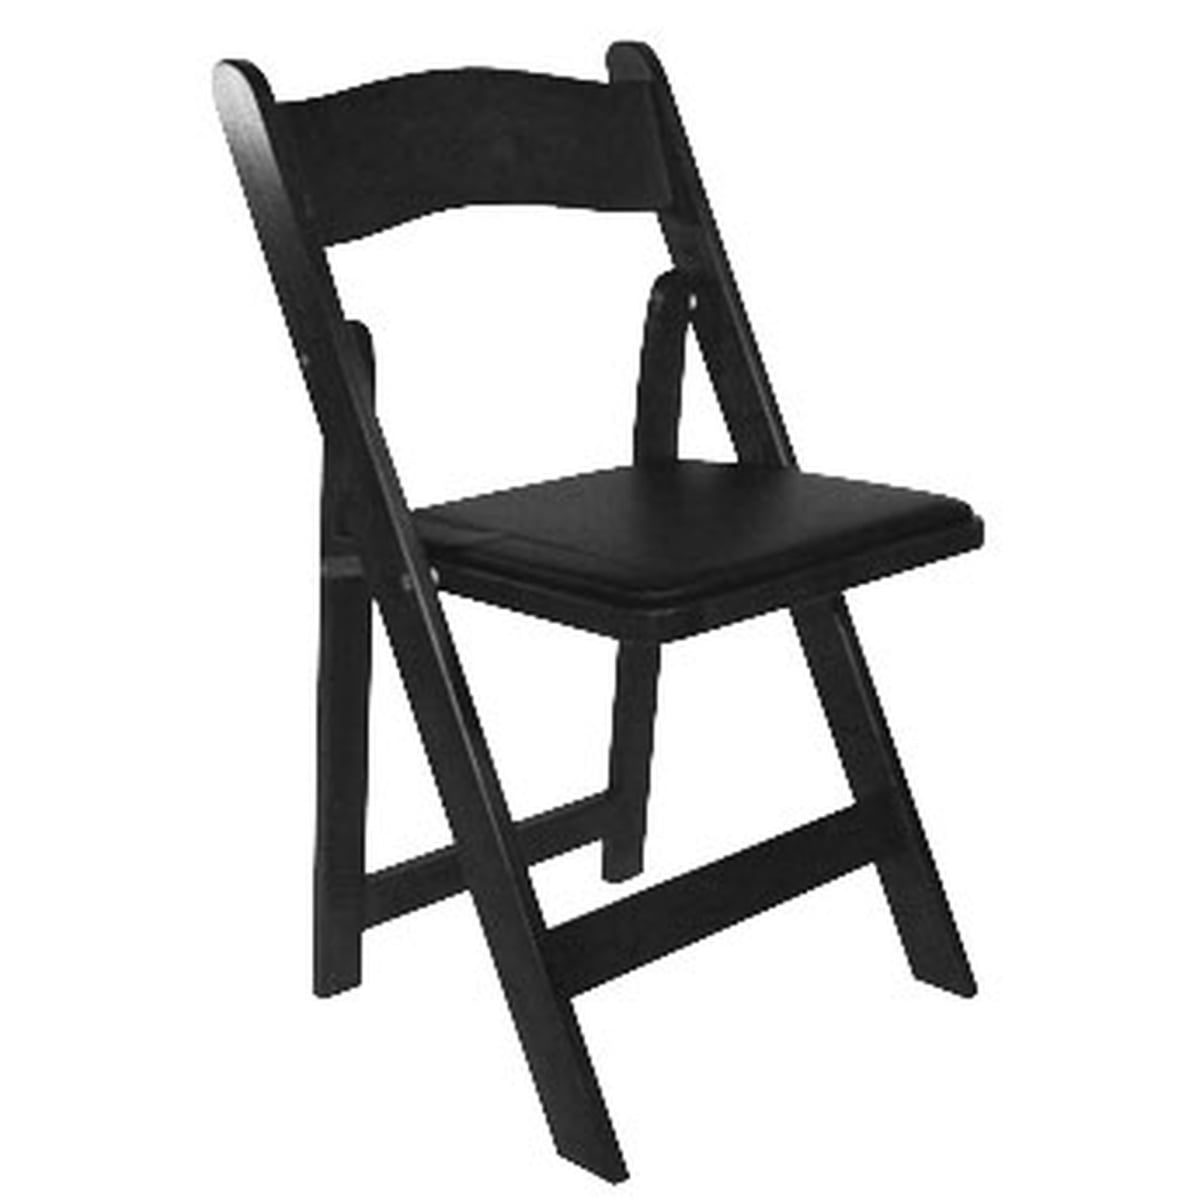 A-101-bk-4 American Classic Black Wood Folding Chair - 30.5 In. - Set Of 4